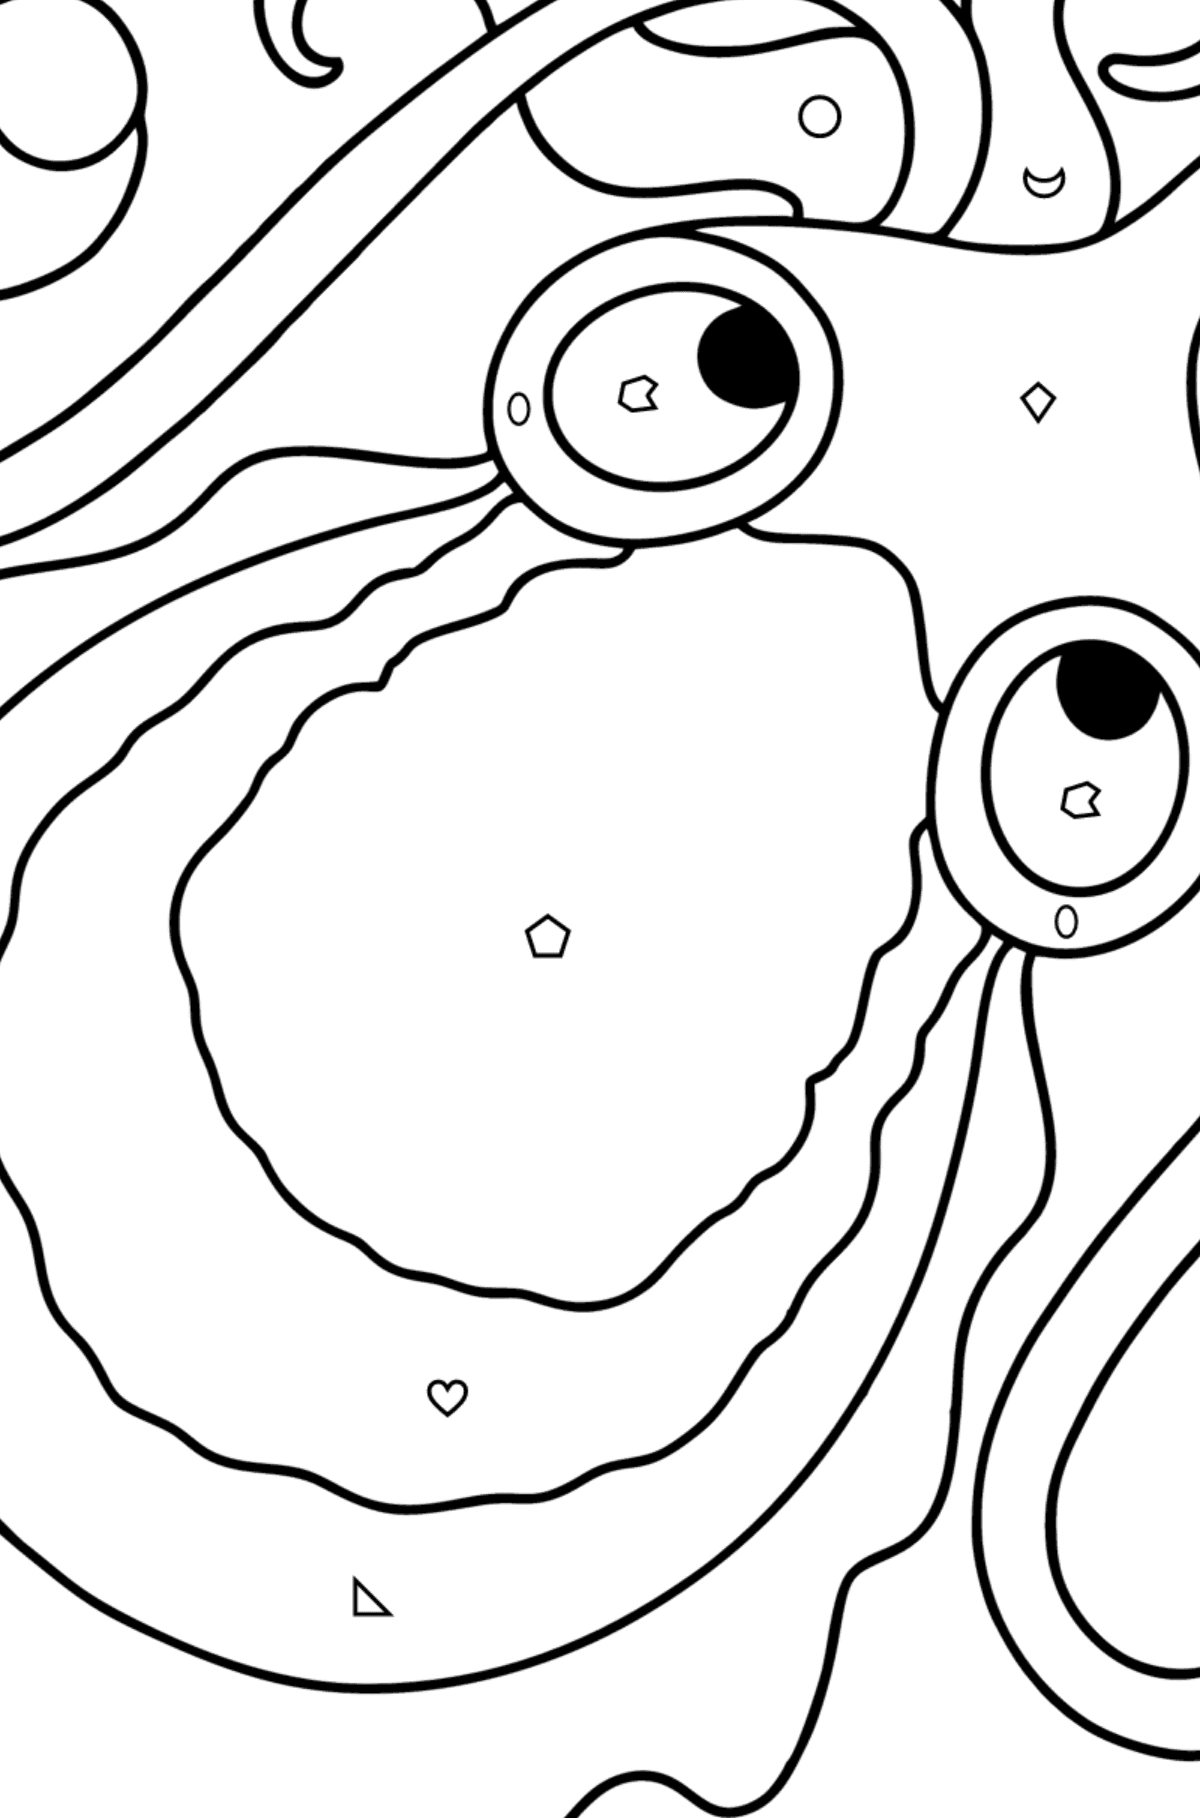 Cuttlefish coloring page - Coloring by Geometric Shapes for Kids